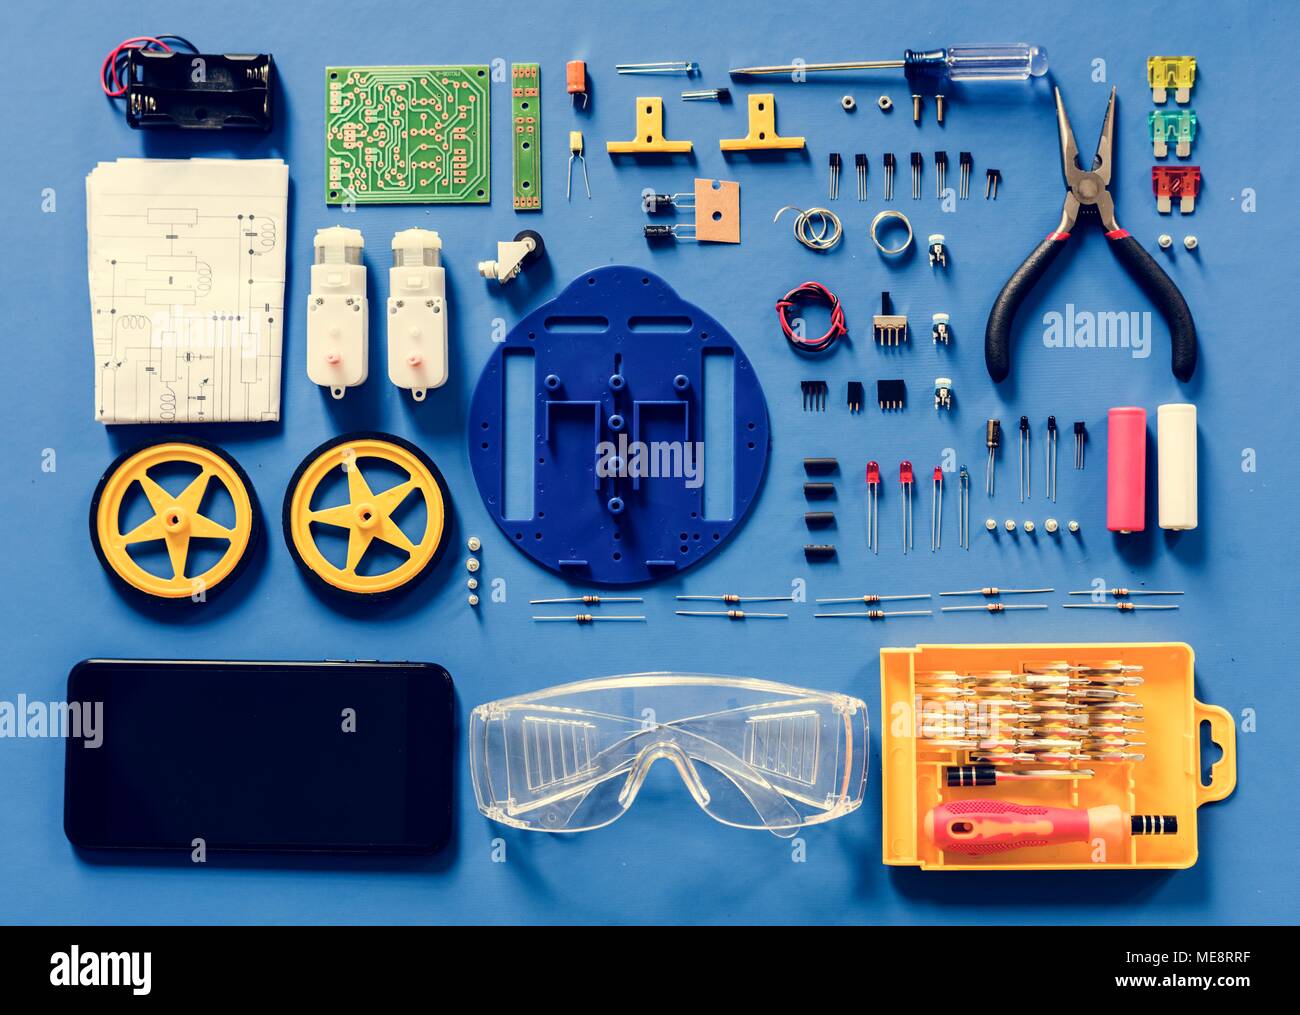 Aerial view of electronics tools equipments on blue background Stock Photo